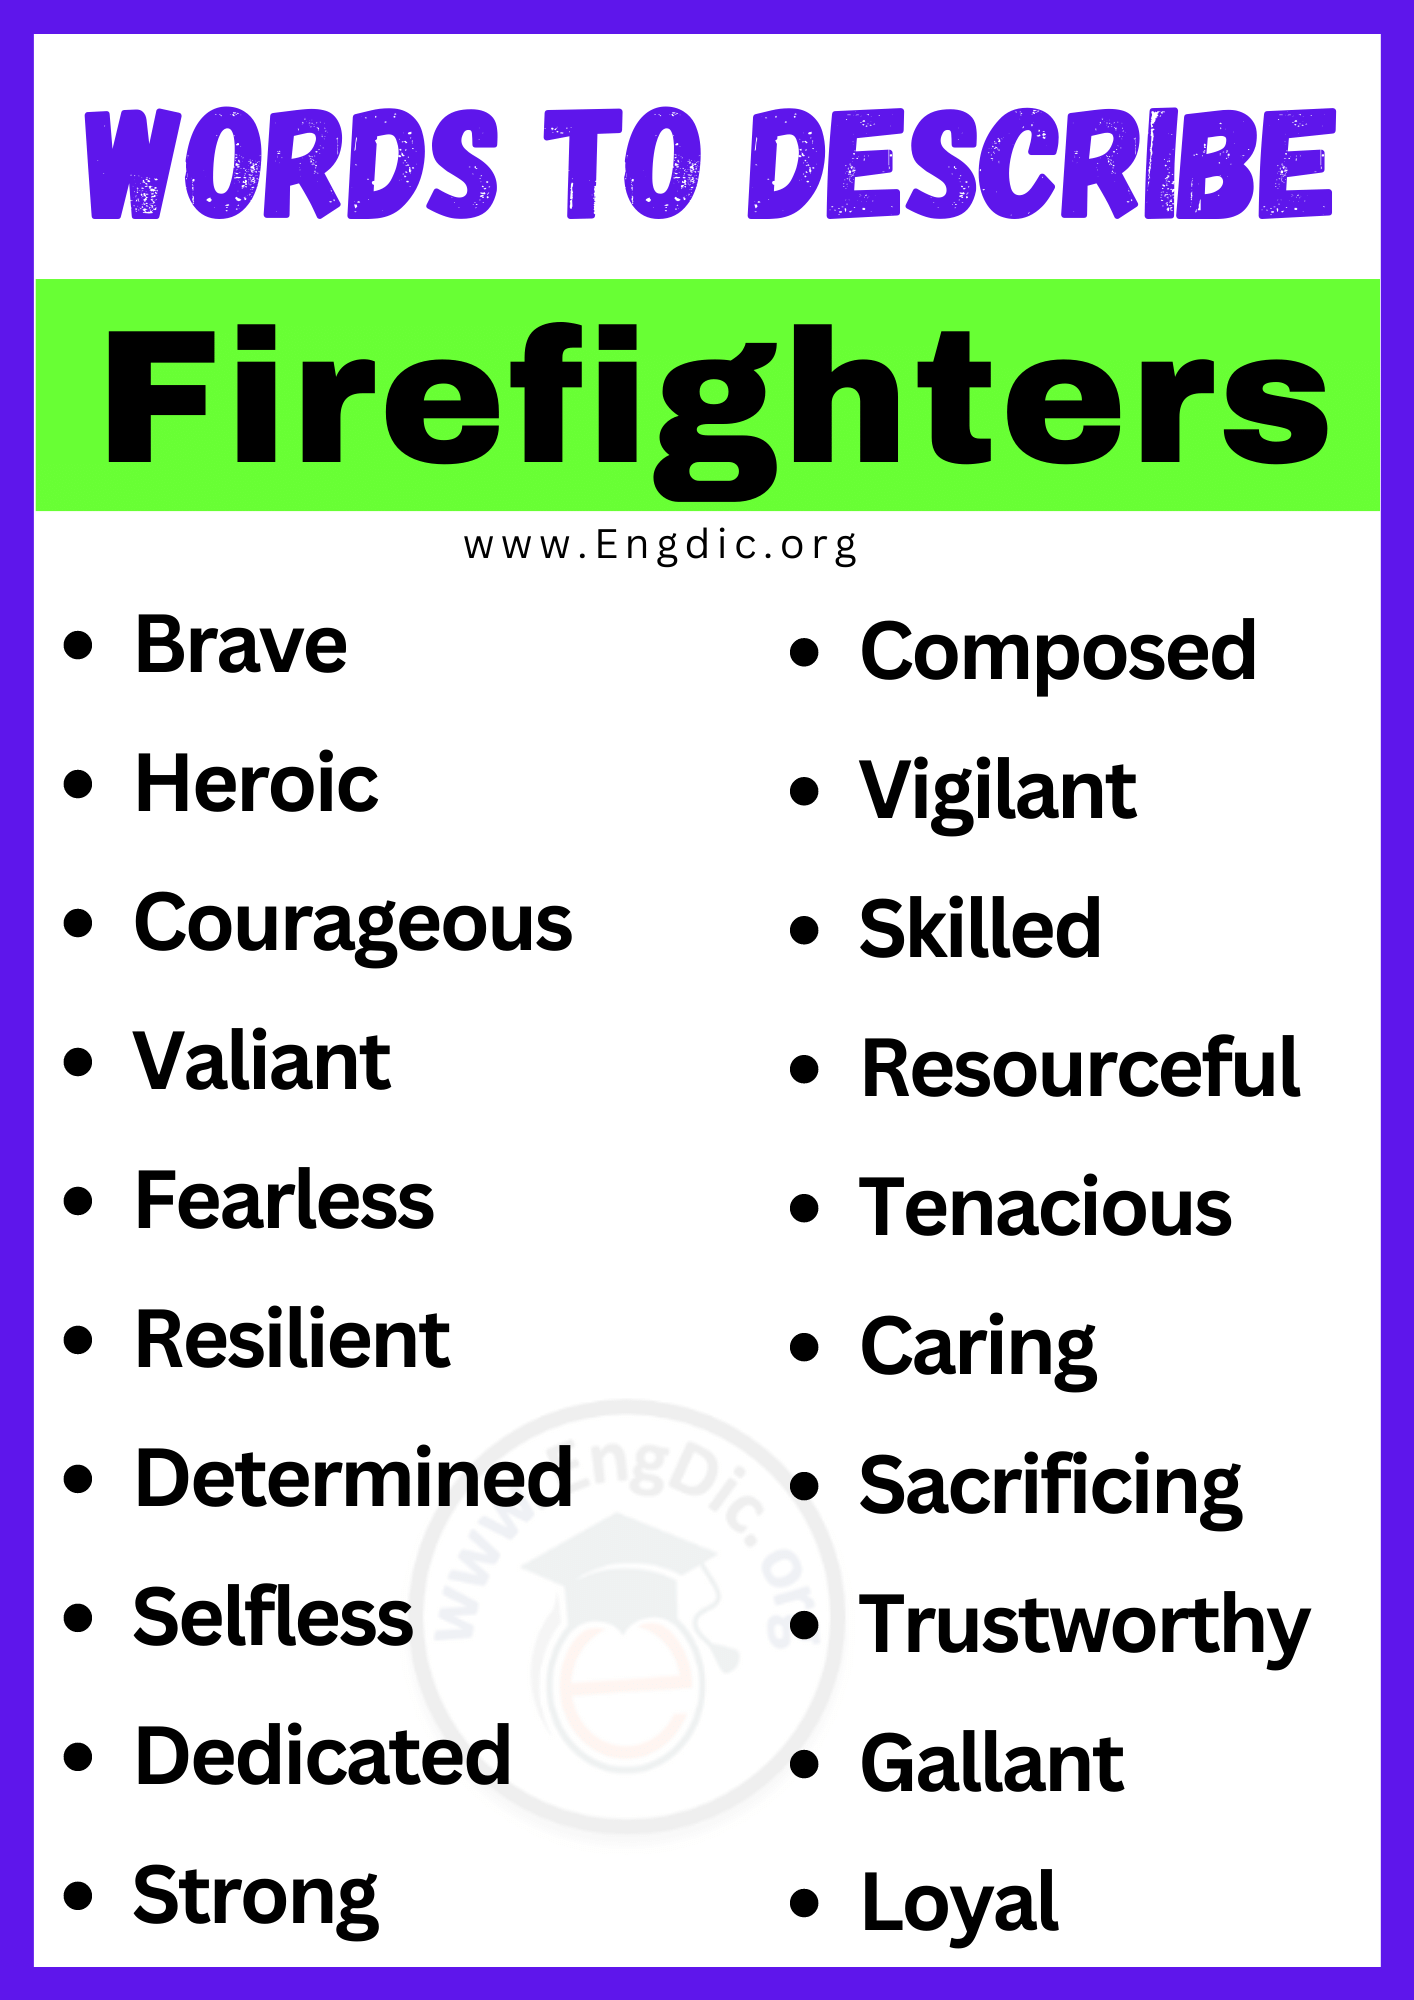 Words to Describe Firefighters